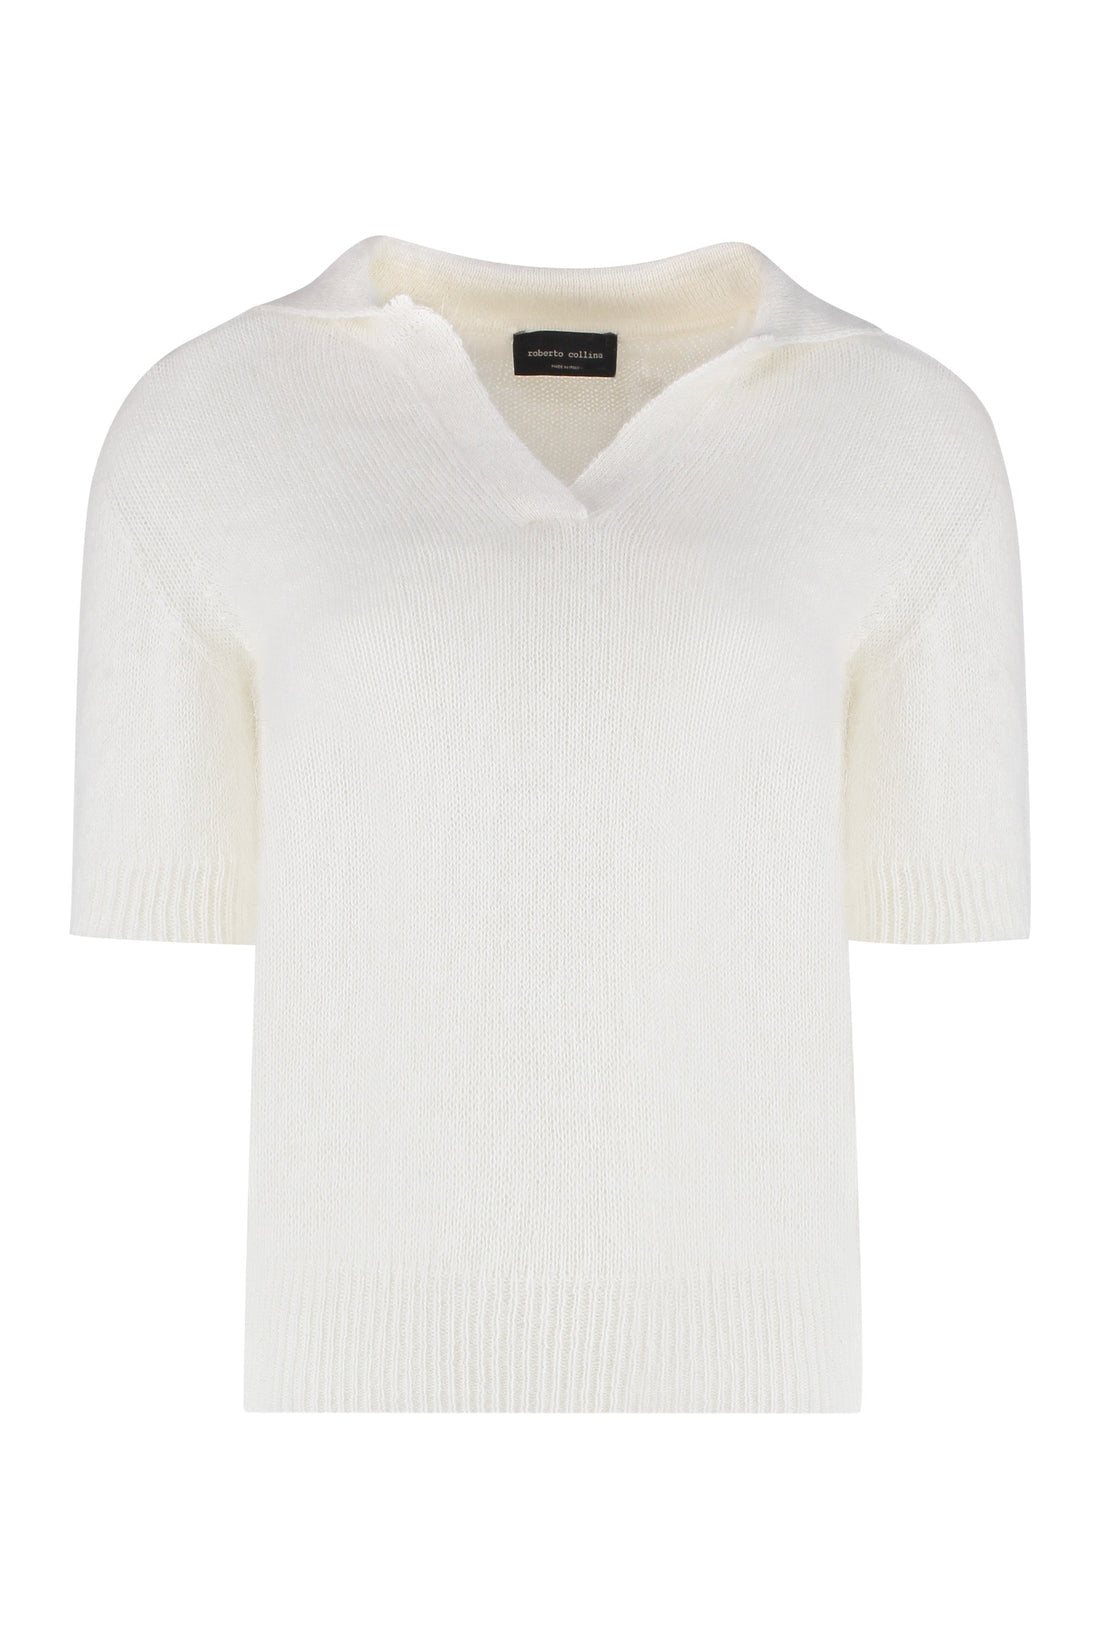 Roberto Collina-OUTLET-SALE-Short sleeve sweater-ARCHIVIST